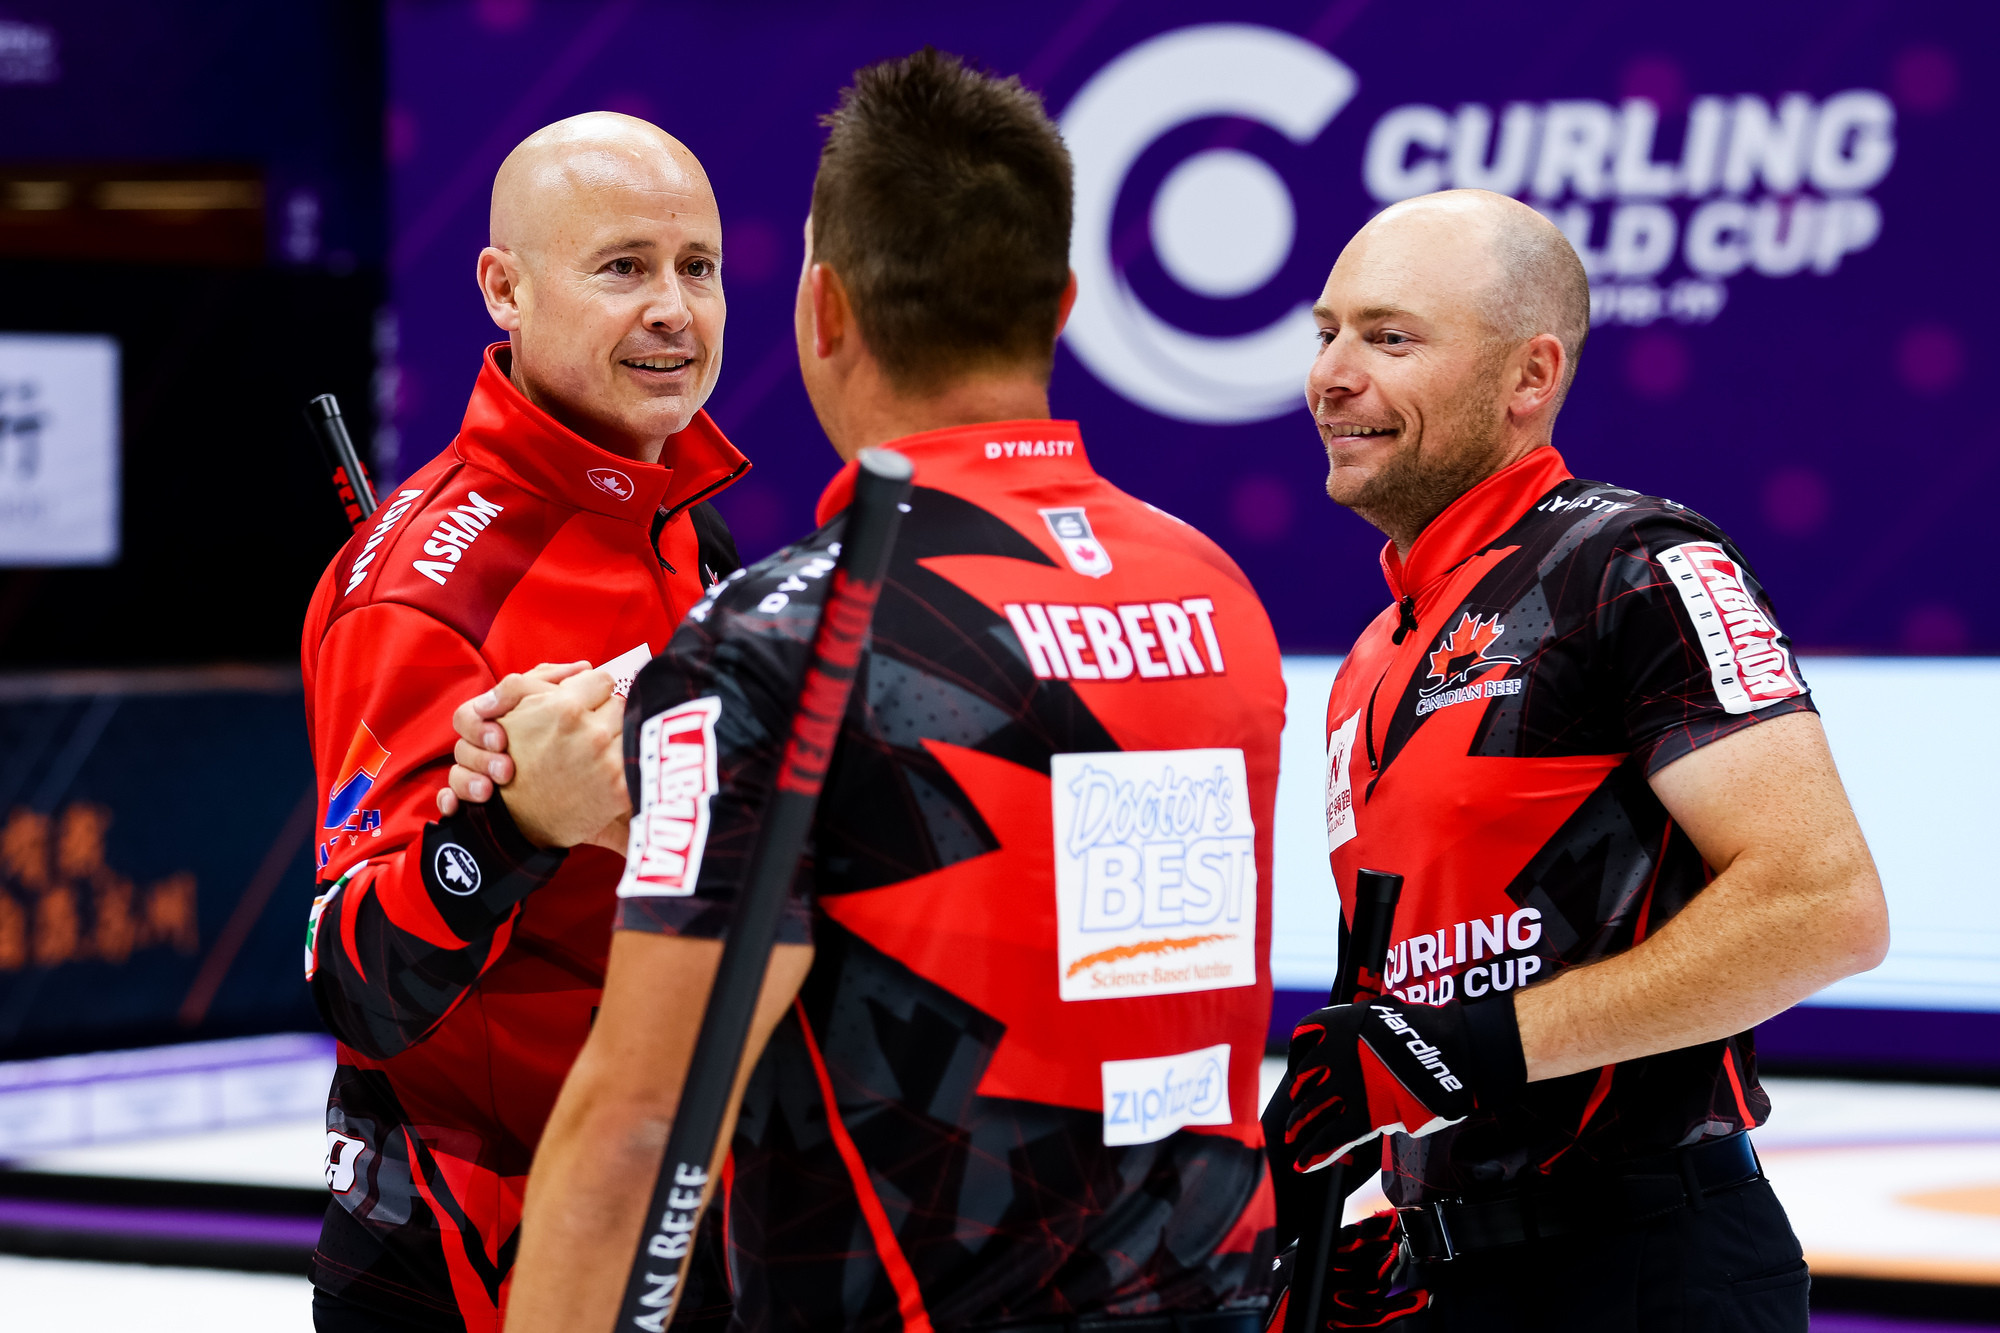 Clean sweep of golds at Curling World Cup in Suzhou earns Canada three Grand Final places